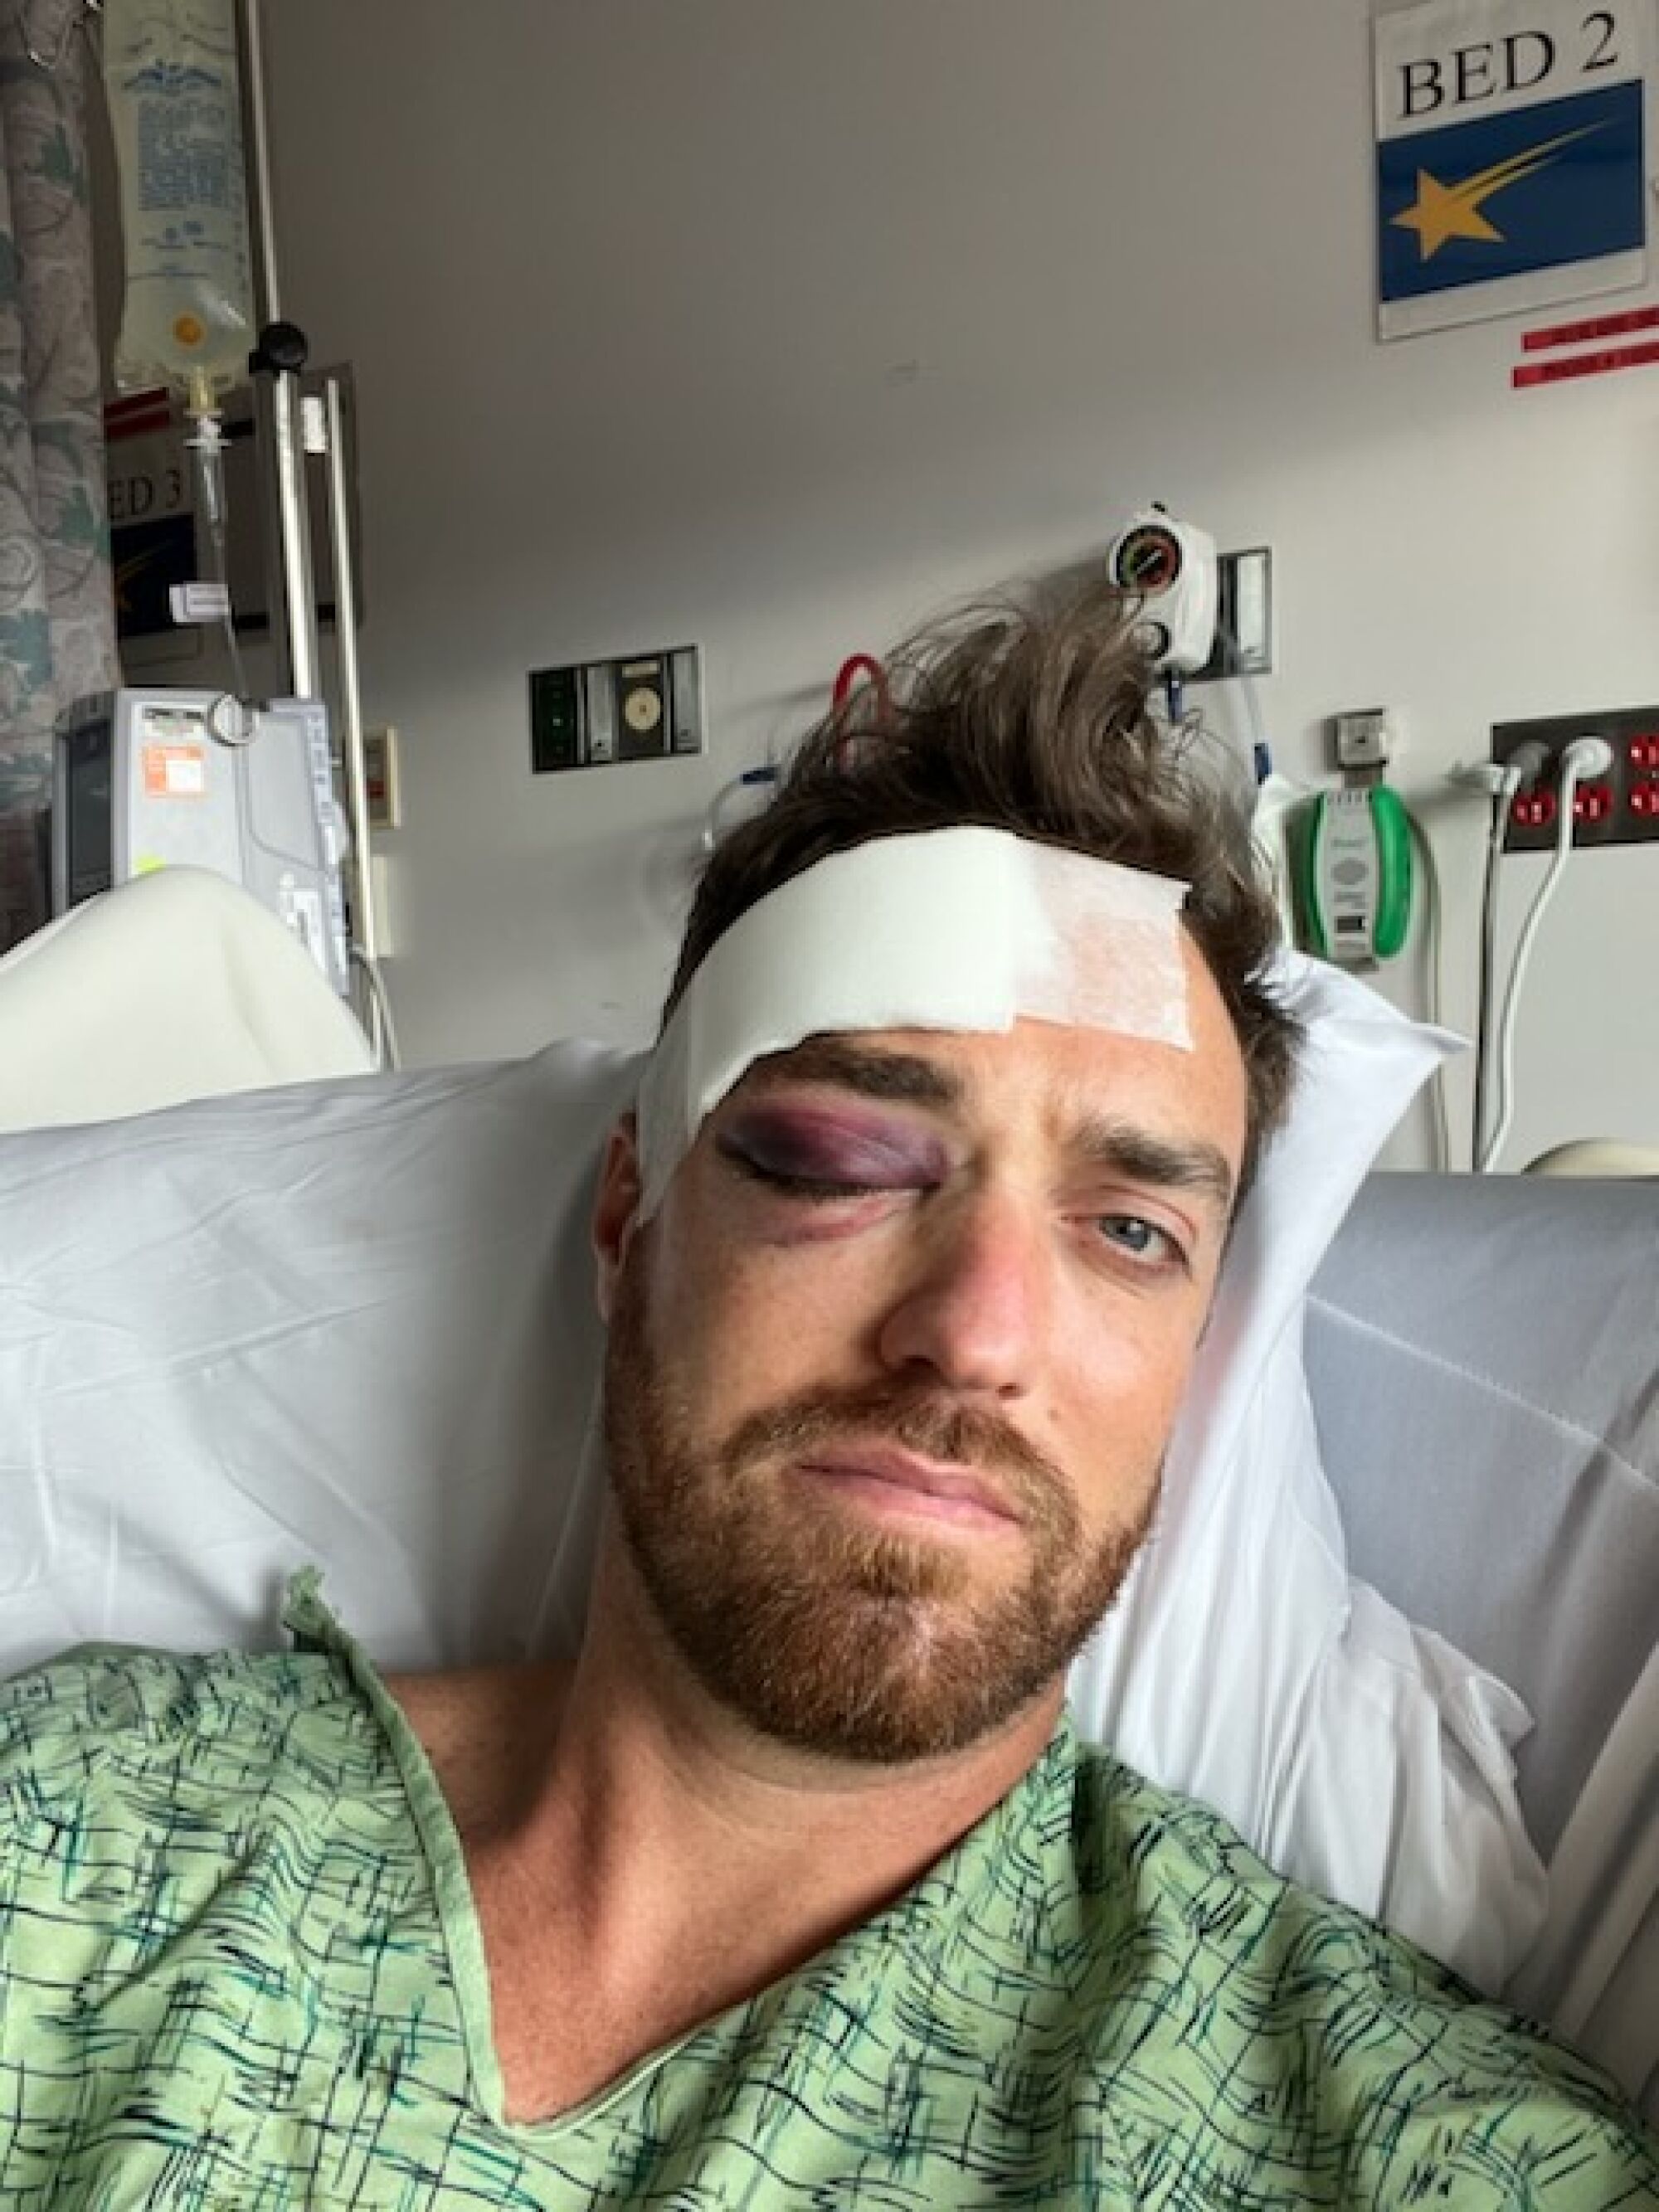 Nathan Crowley with facial injuries in a hospital bed.